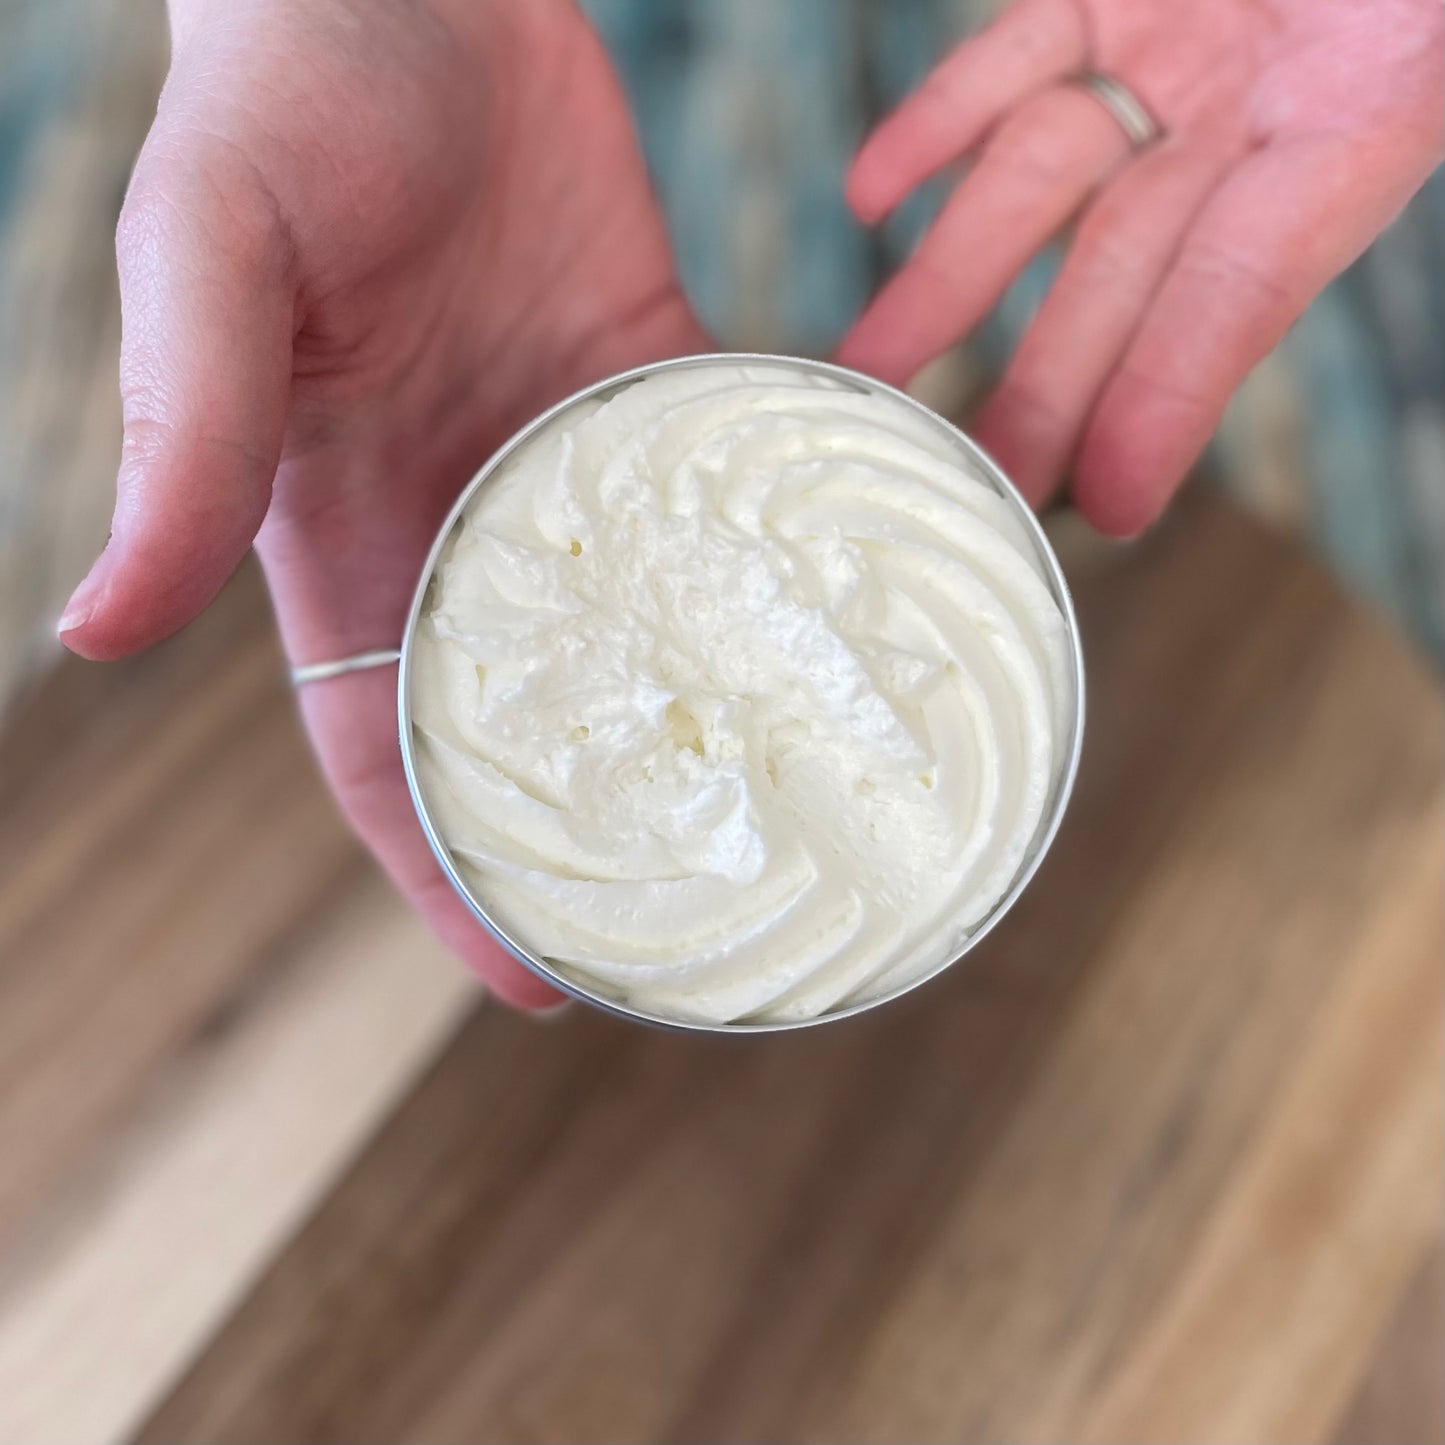 Whipped Tallow Skin Cream | All Natural Moisturizer and Body Butter | Essential Oil Scent | Made with Local Ingredients | Aluminum Container